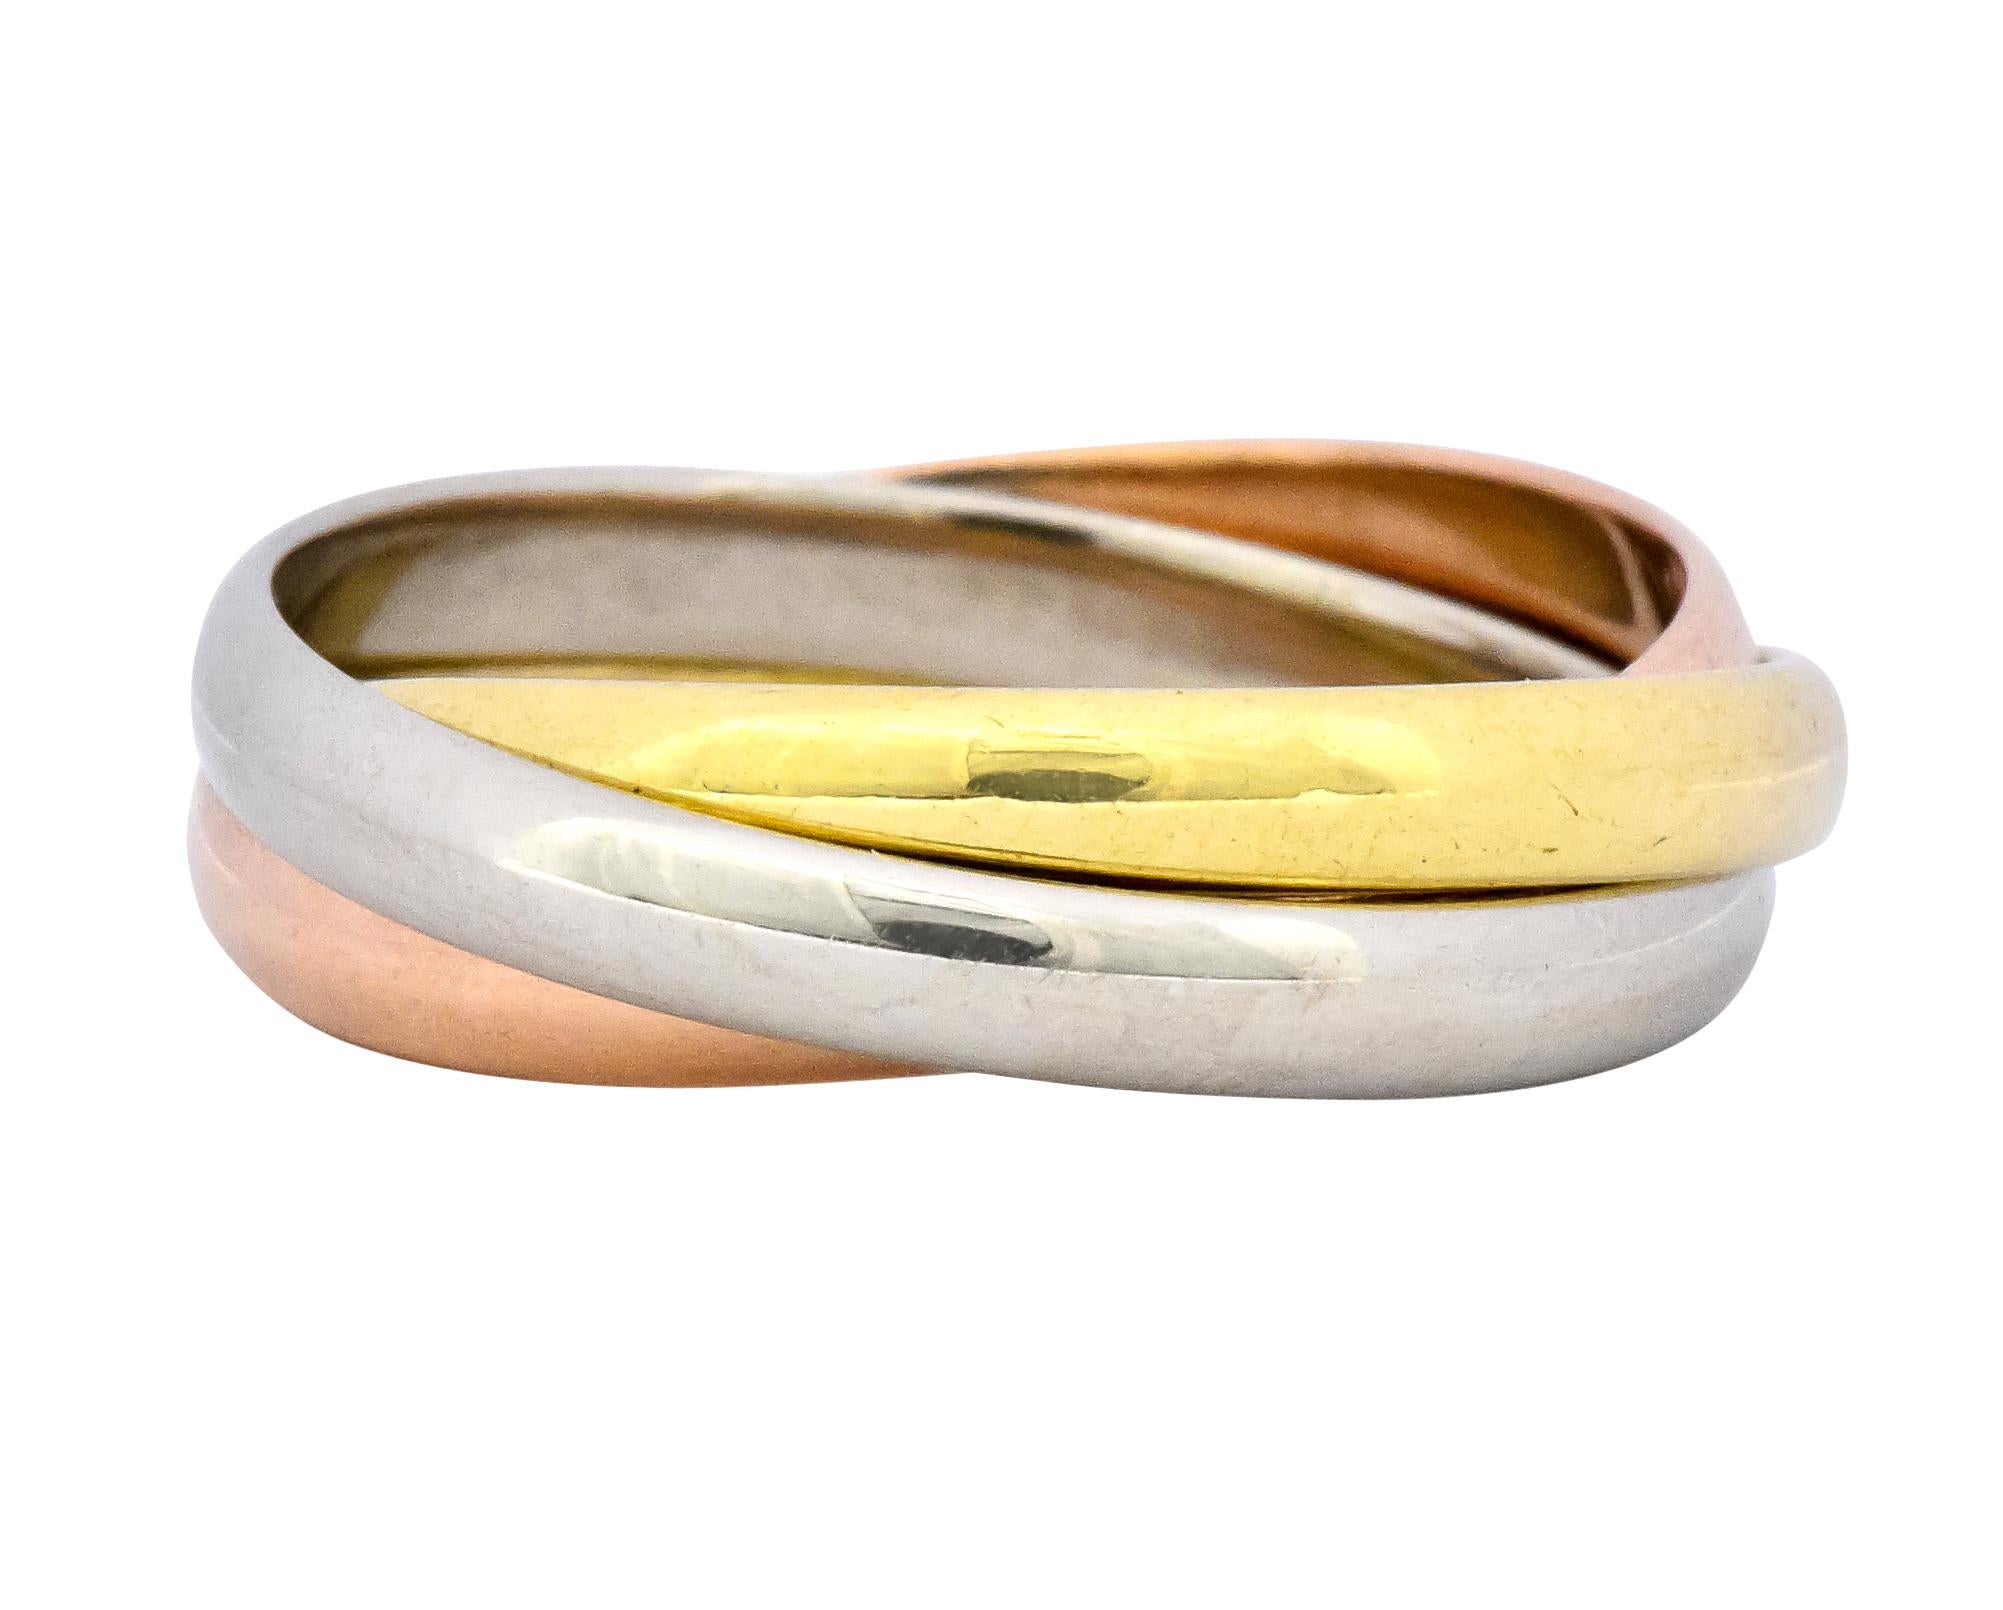 Featuring three intersecting white, yellow, and rose gold band rings with a high polished finish

Fully signed Cartier and stamped 18k for 18 karat gold

Ring Size: 8 & not sizable

Top measures: 2.5 mm and sits 1.0 mm high

Total weight: 6.4